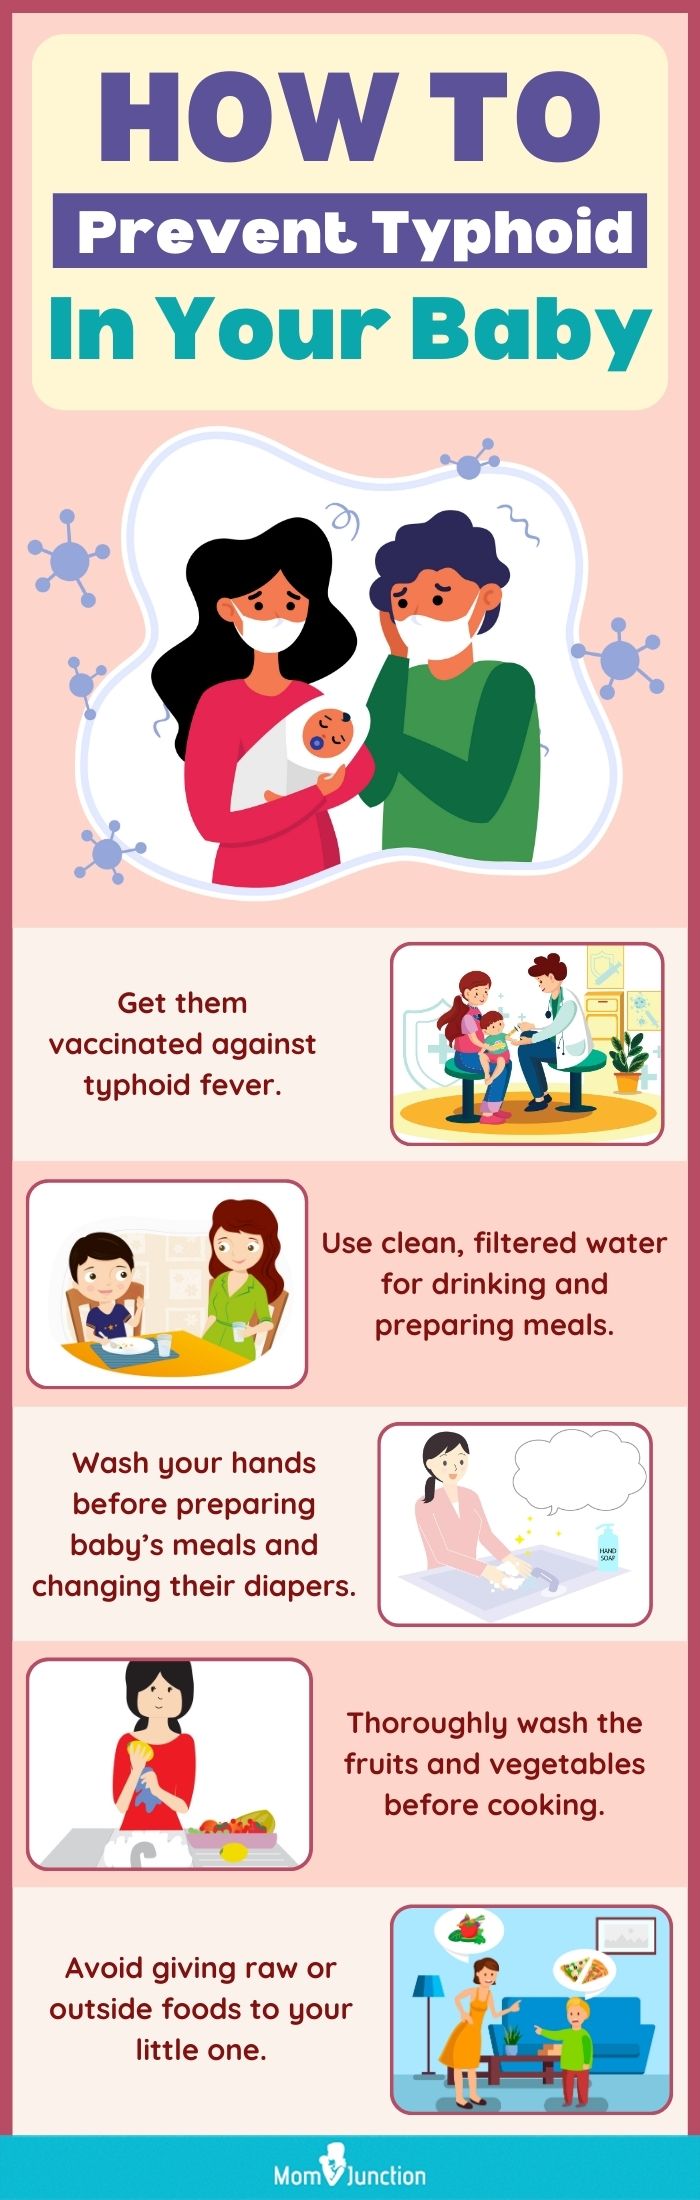 how to prevent typhoid in your baby [infographic]